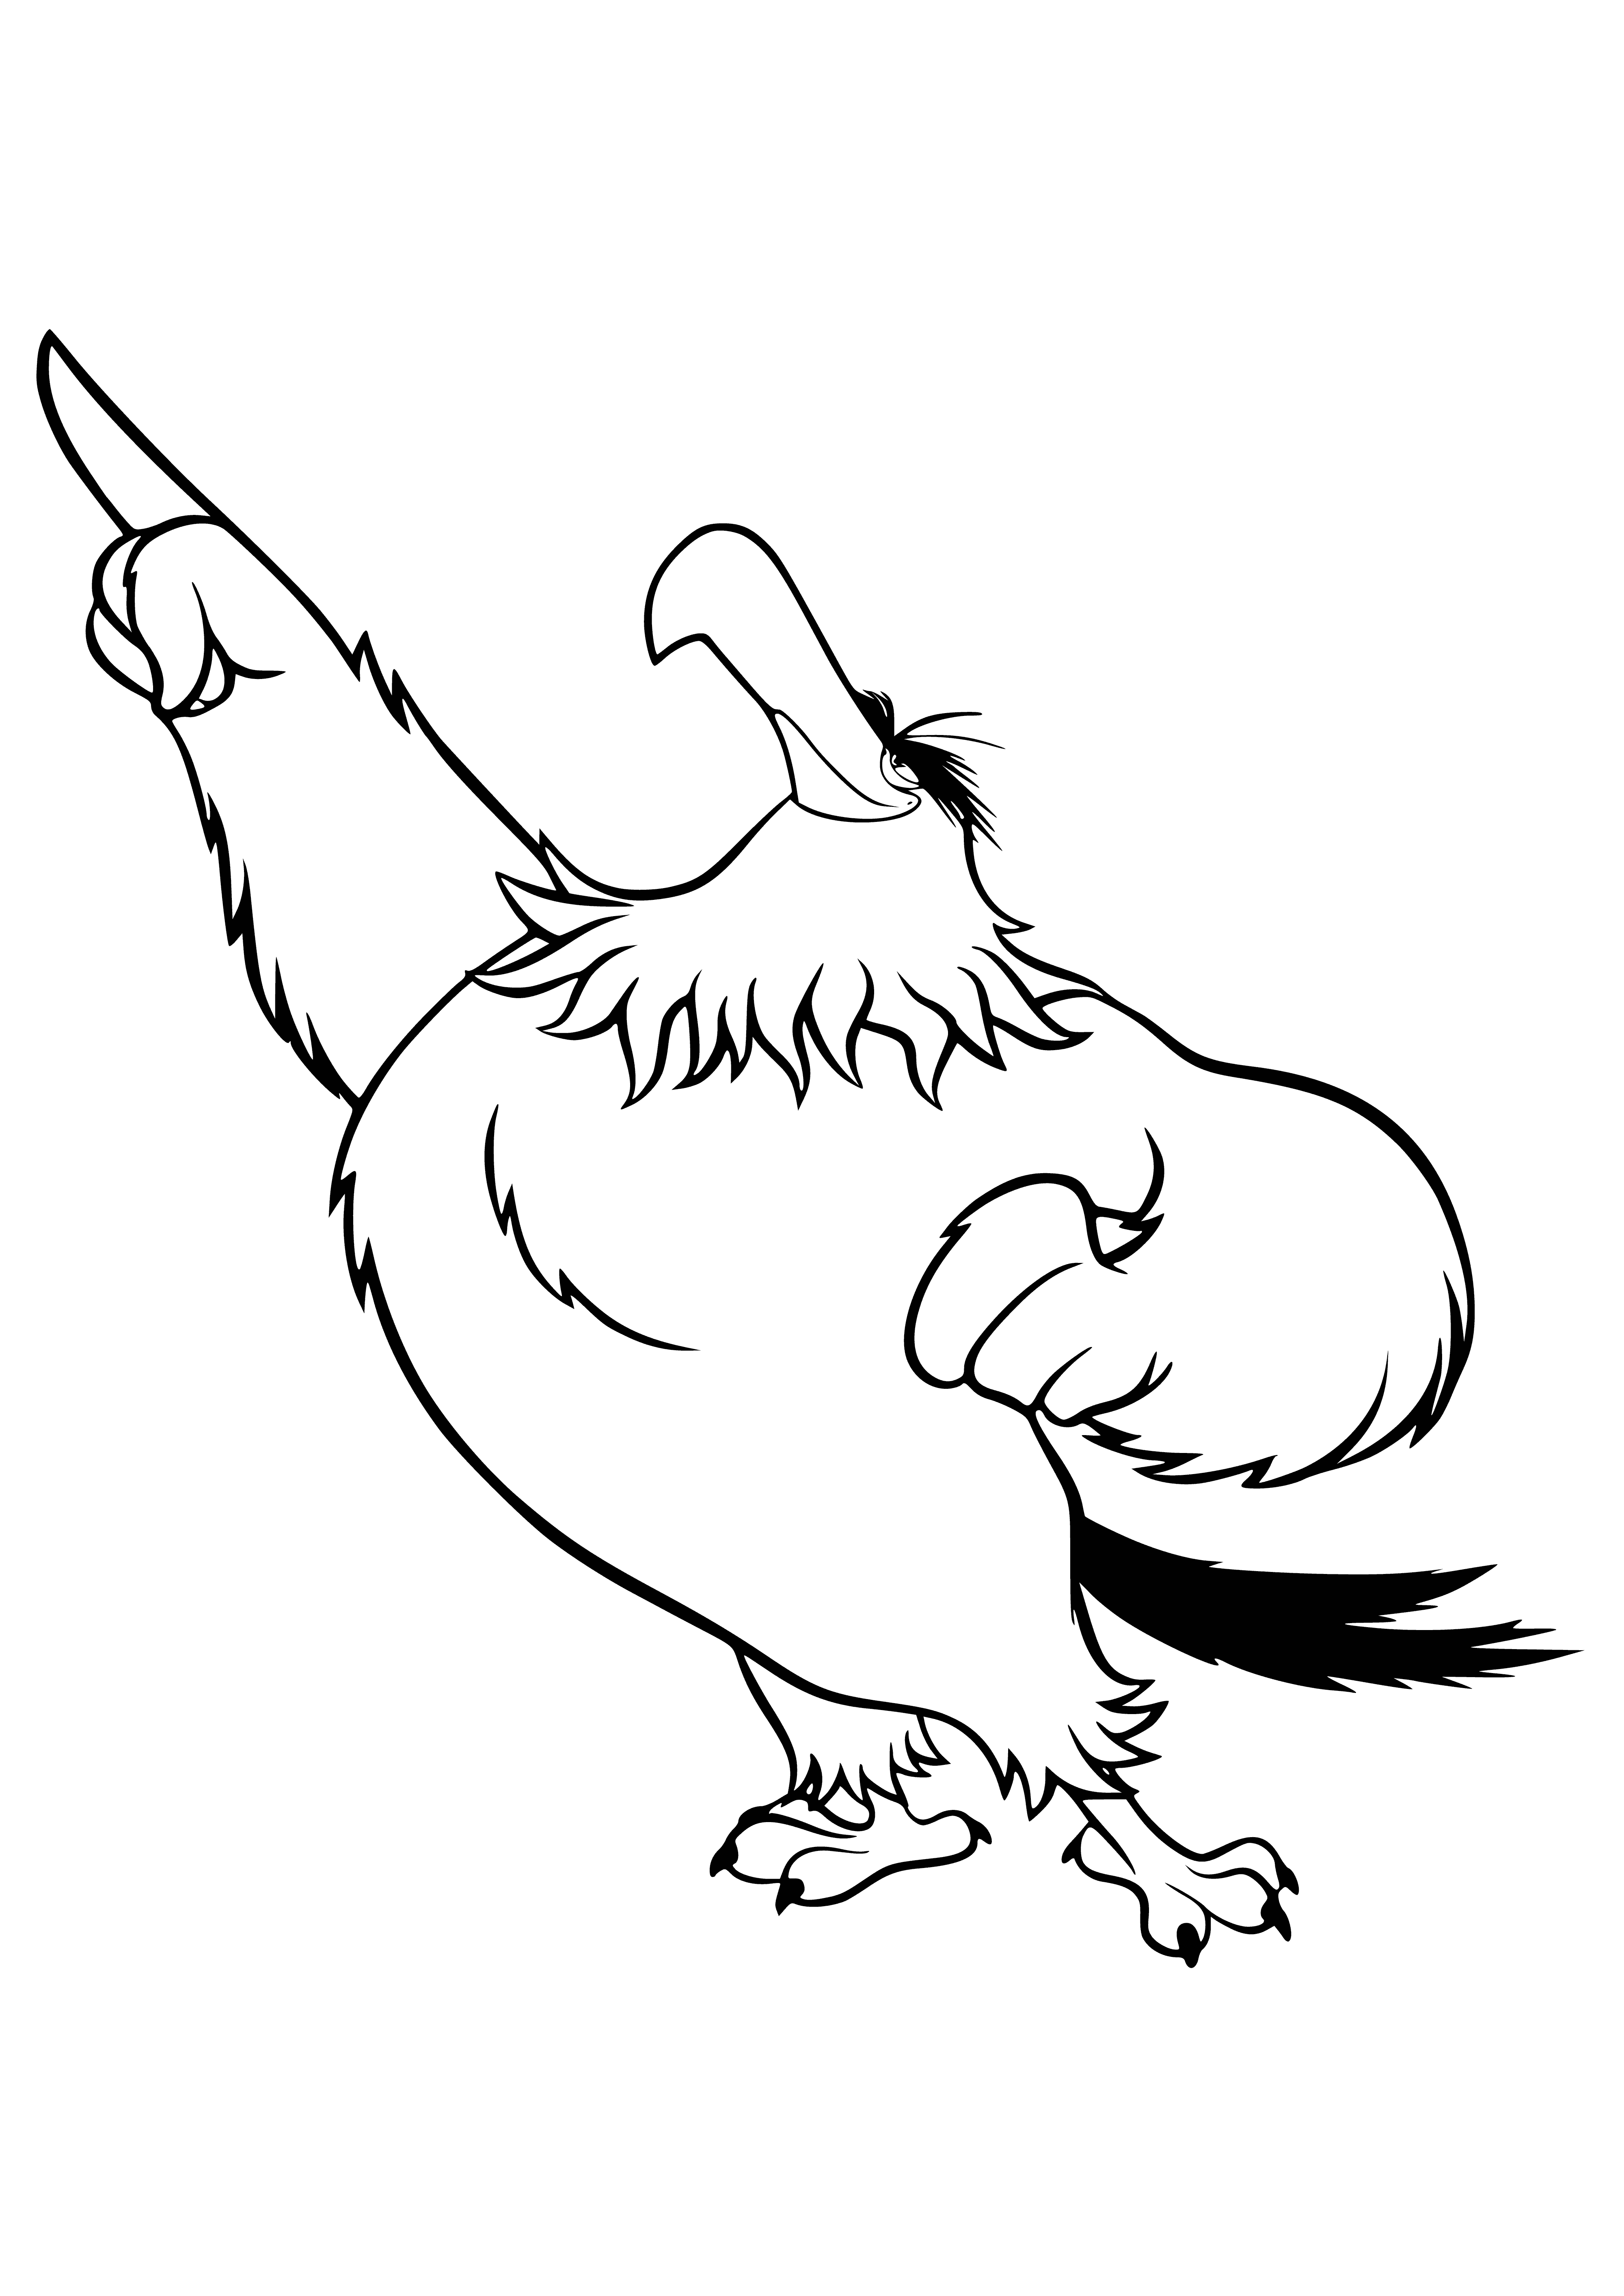 coloring page: Enormous white bird with large beak angrily glaring, stocky & muscular body, wings spread wide in a threatening manner.